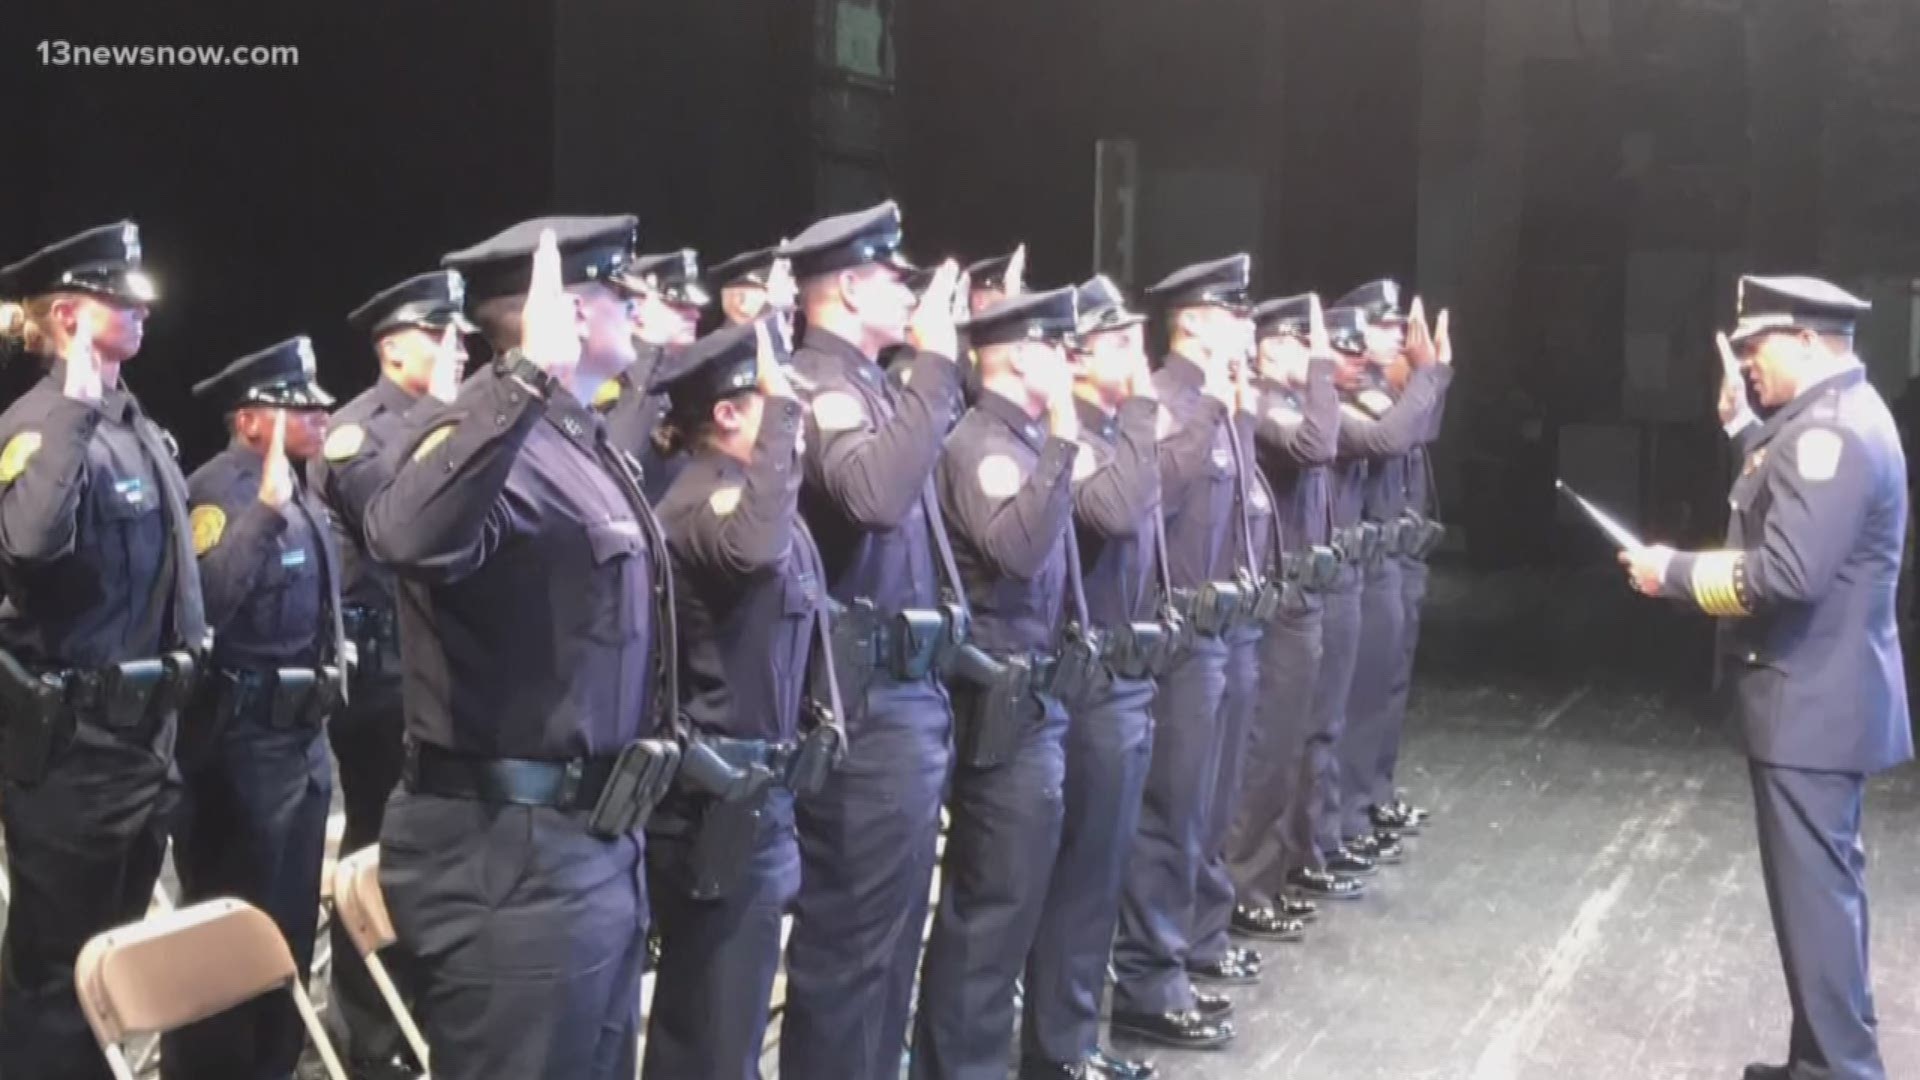 Twenty-two police officers graduated from police academy Wednesday, July 17, 2019.